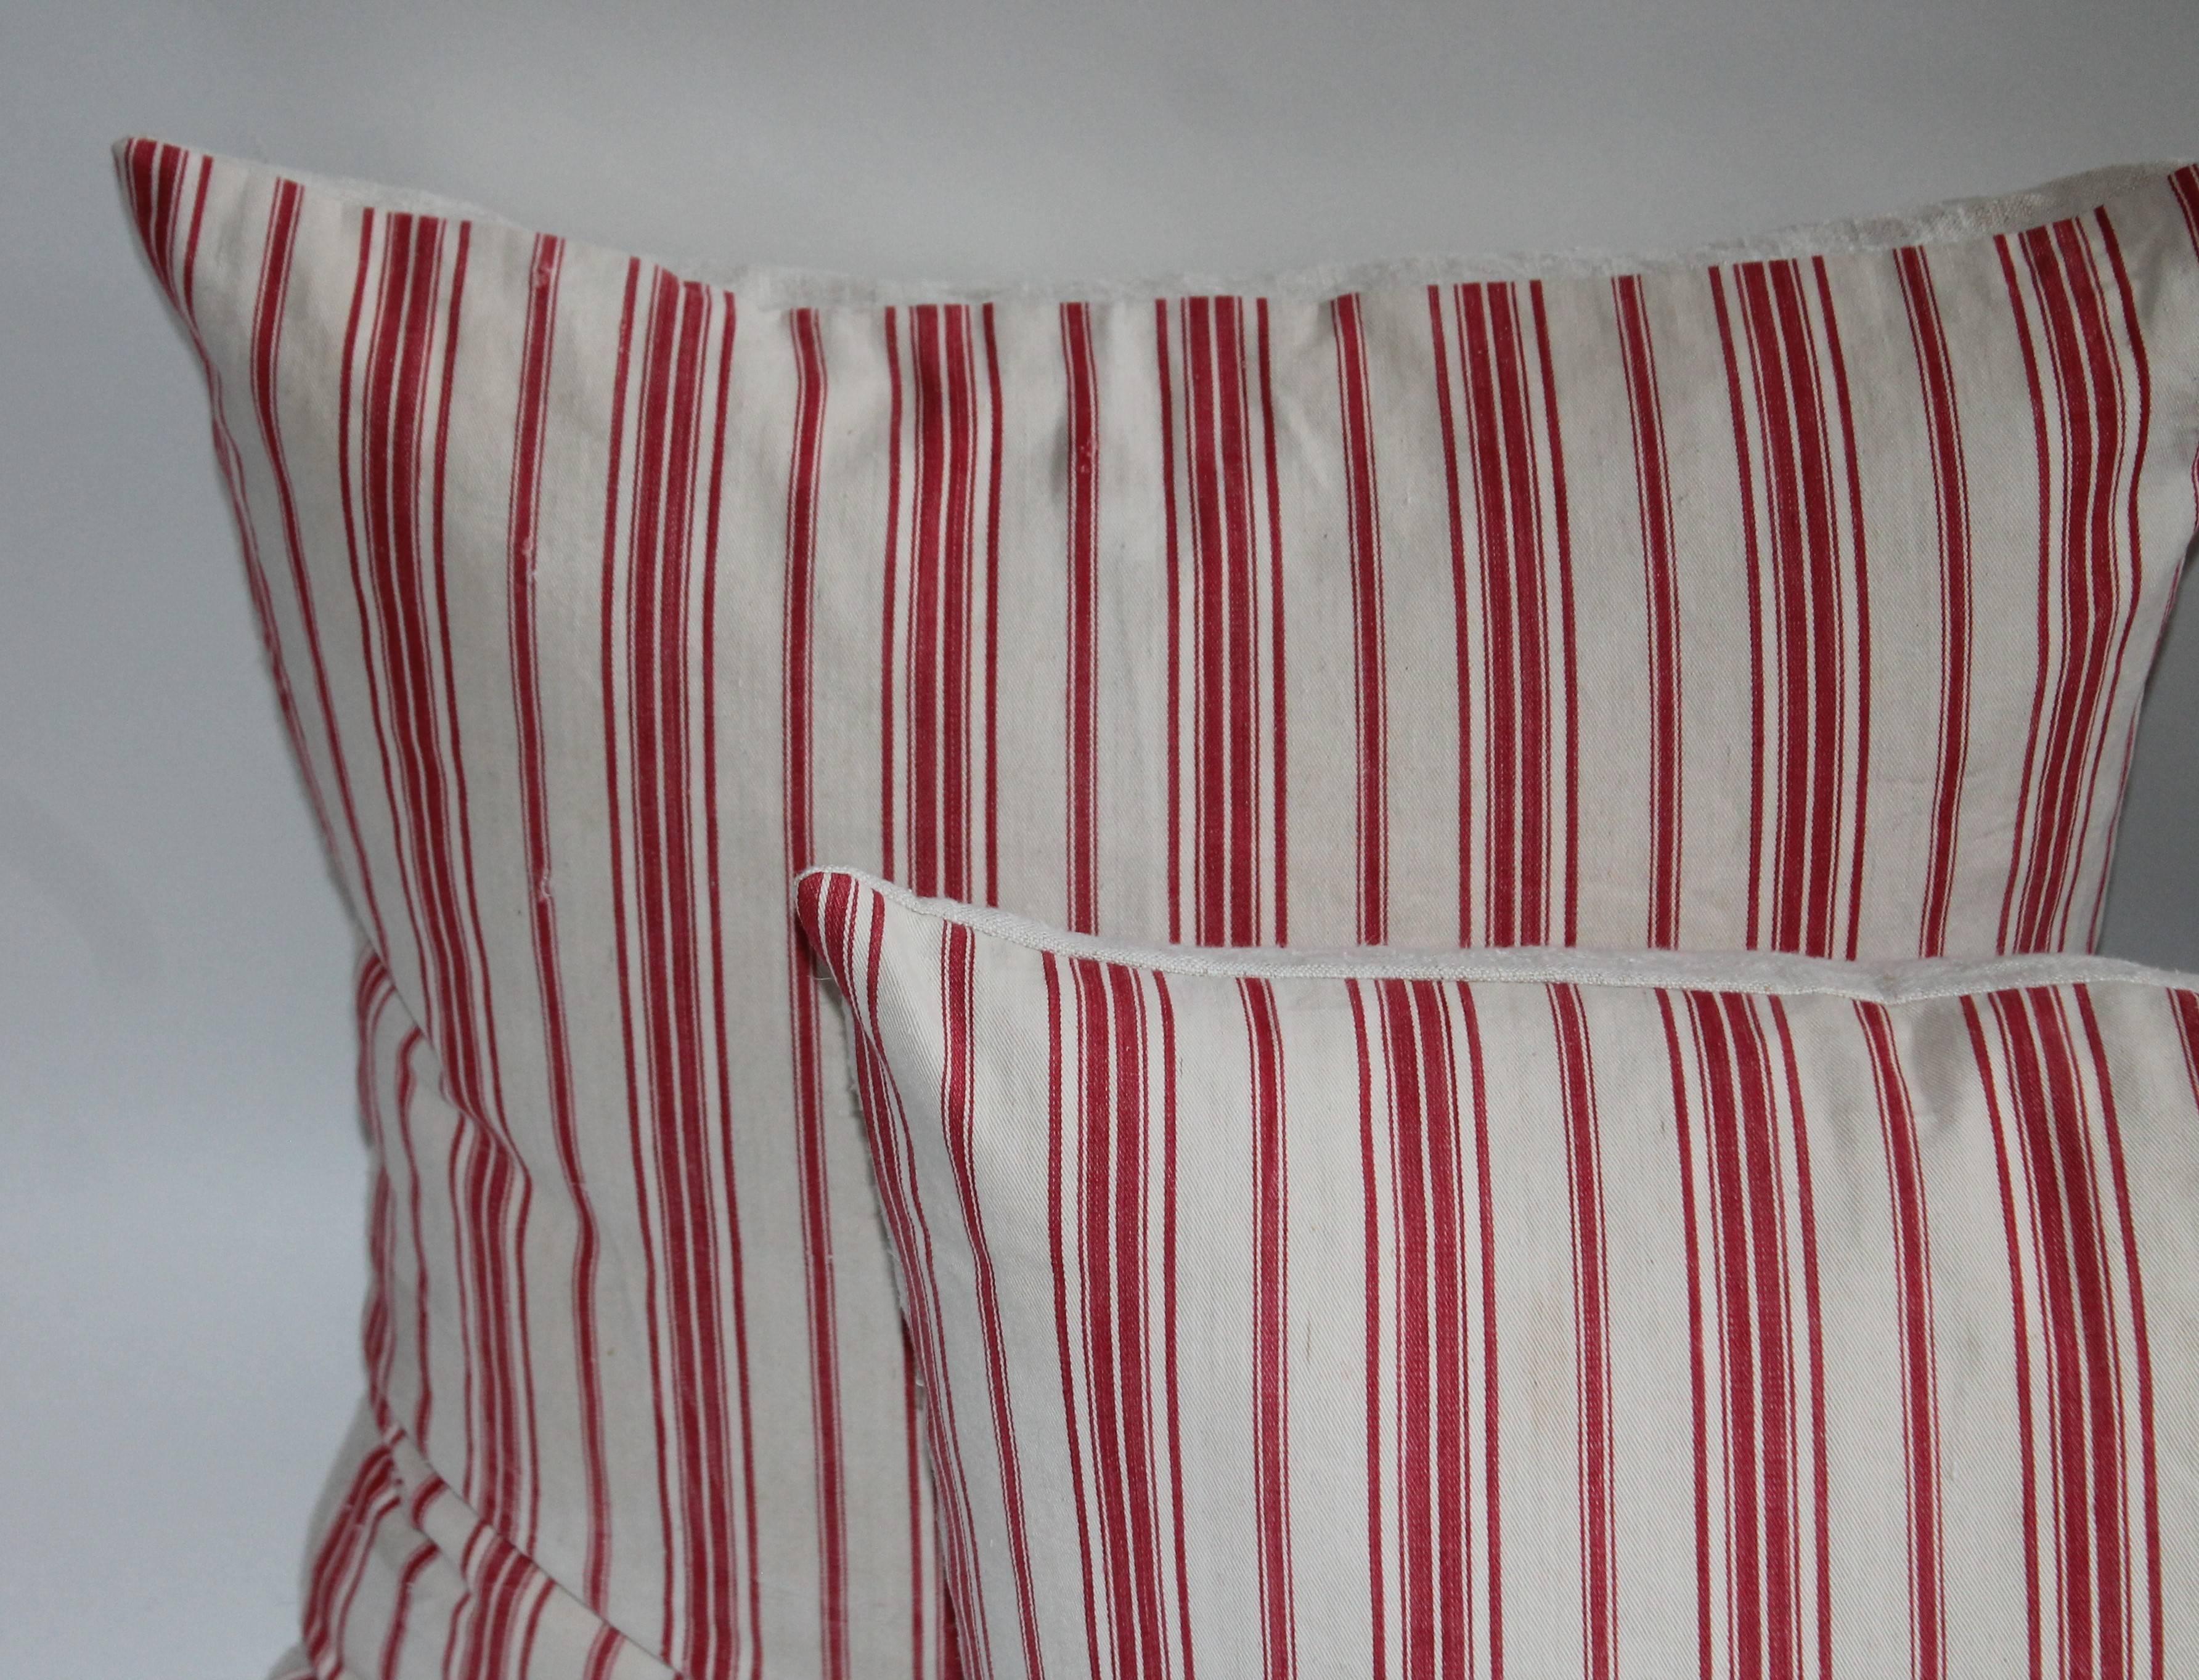 These amazing red ticking pillows are a beautiful find. This beautiful trio/pairs of American ticking pillows have been professionally cleaned. These pairs all have zipper enclosures with down and feather inserts.

The two pairs to the left of the